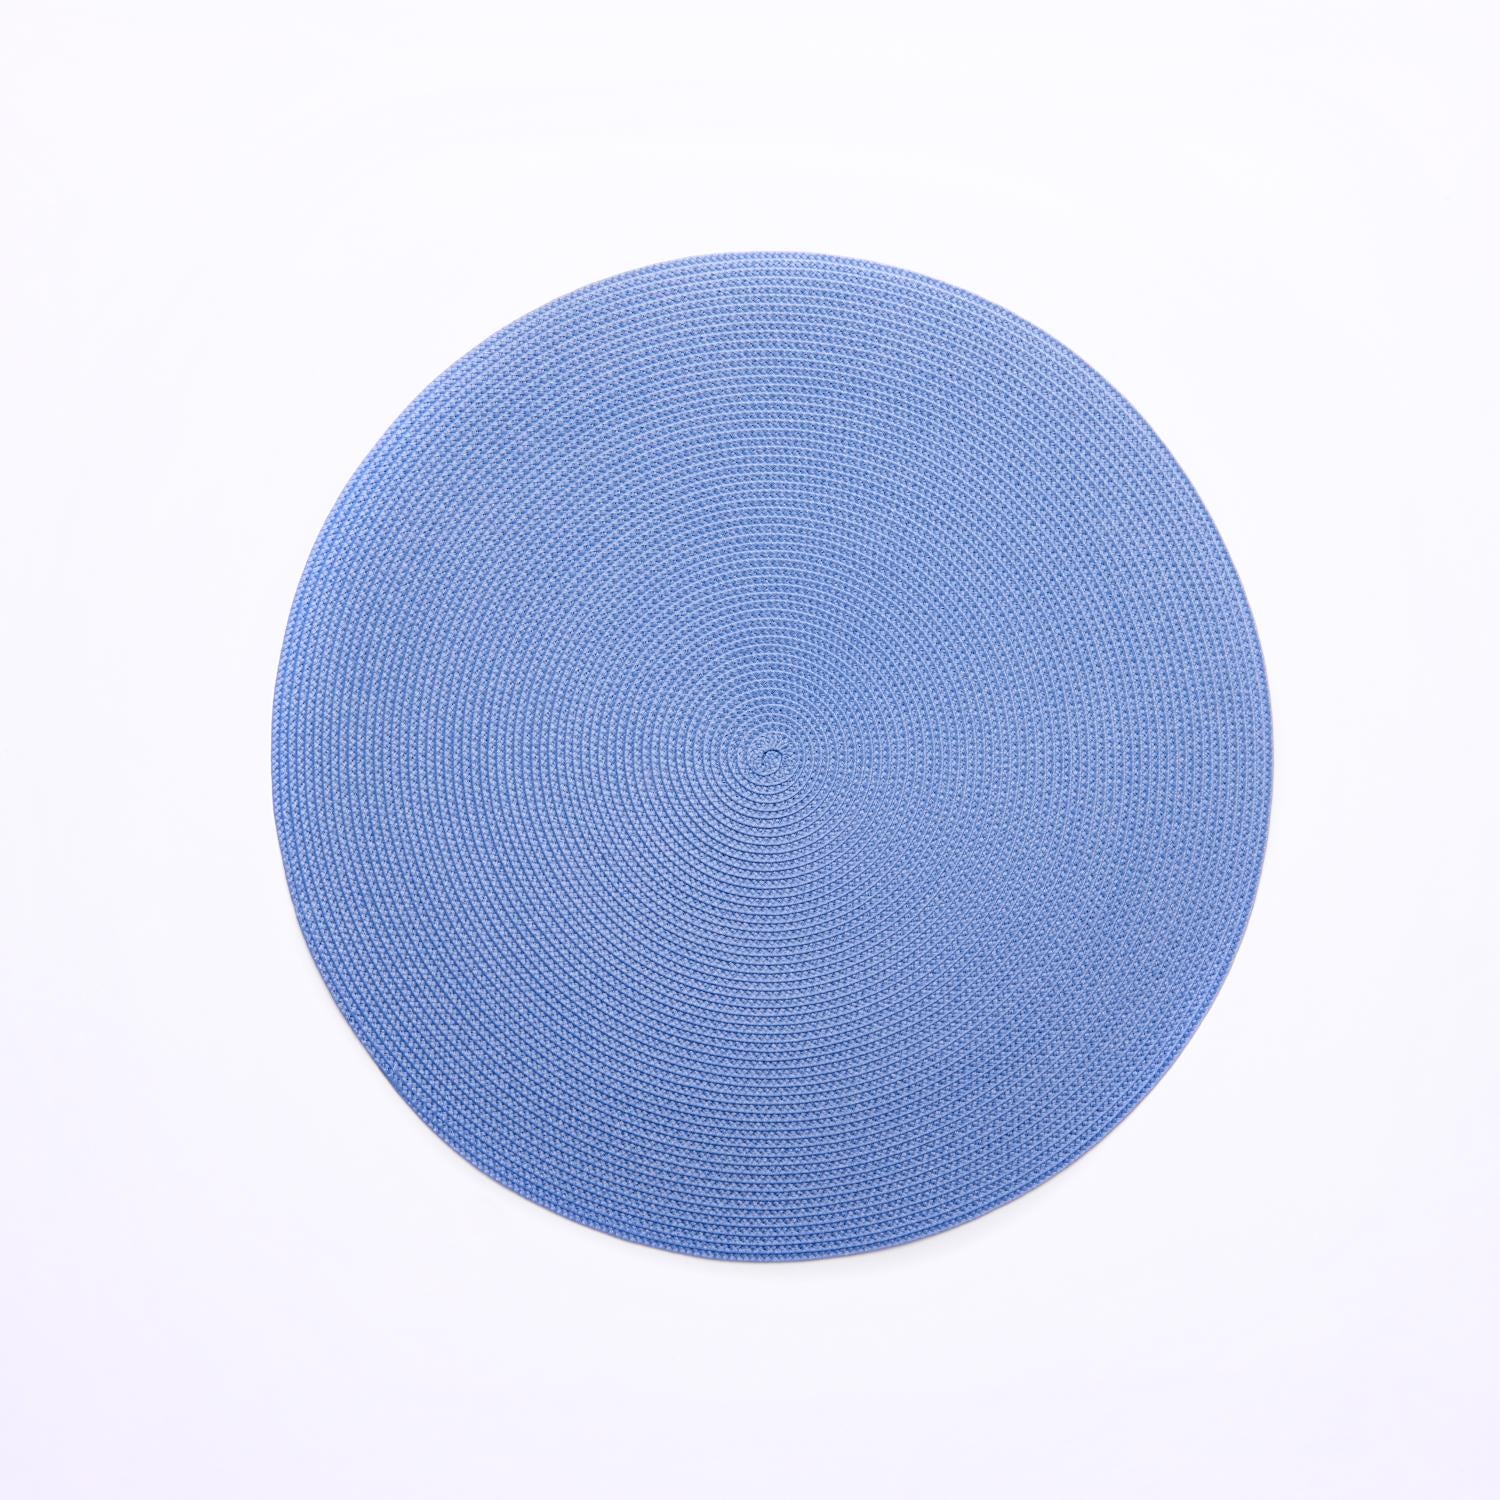 15" Round Woven Placemat - Colony Blue